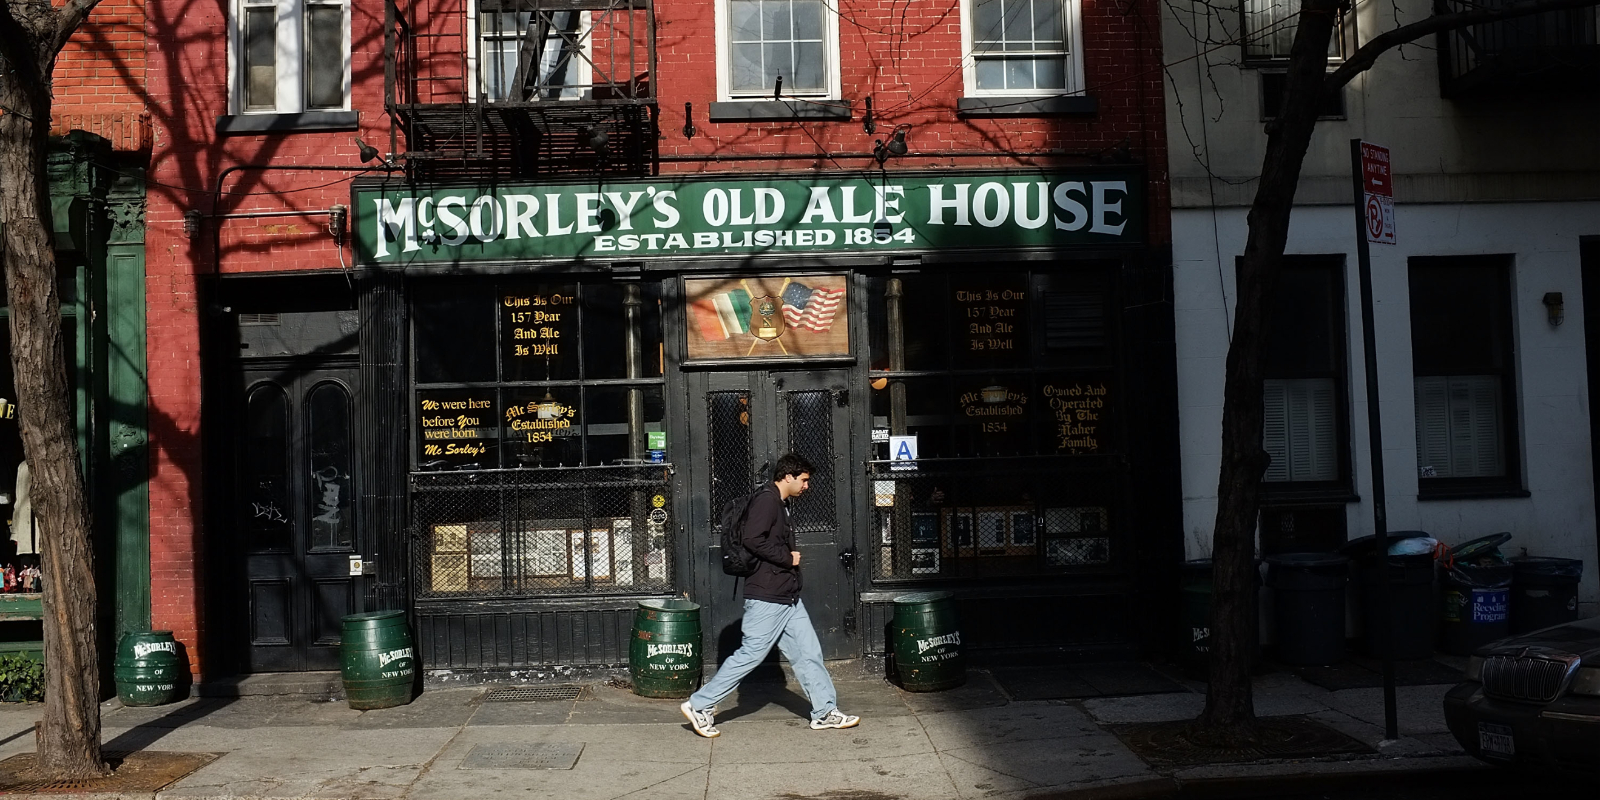 McSorley's Old Ale House in Greenwich Village, New York City.